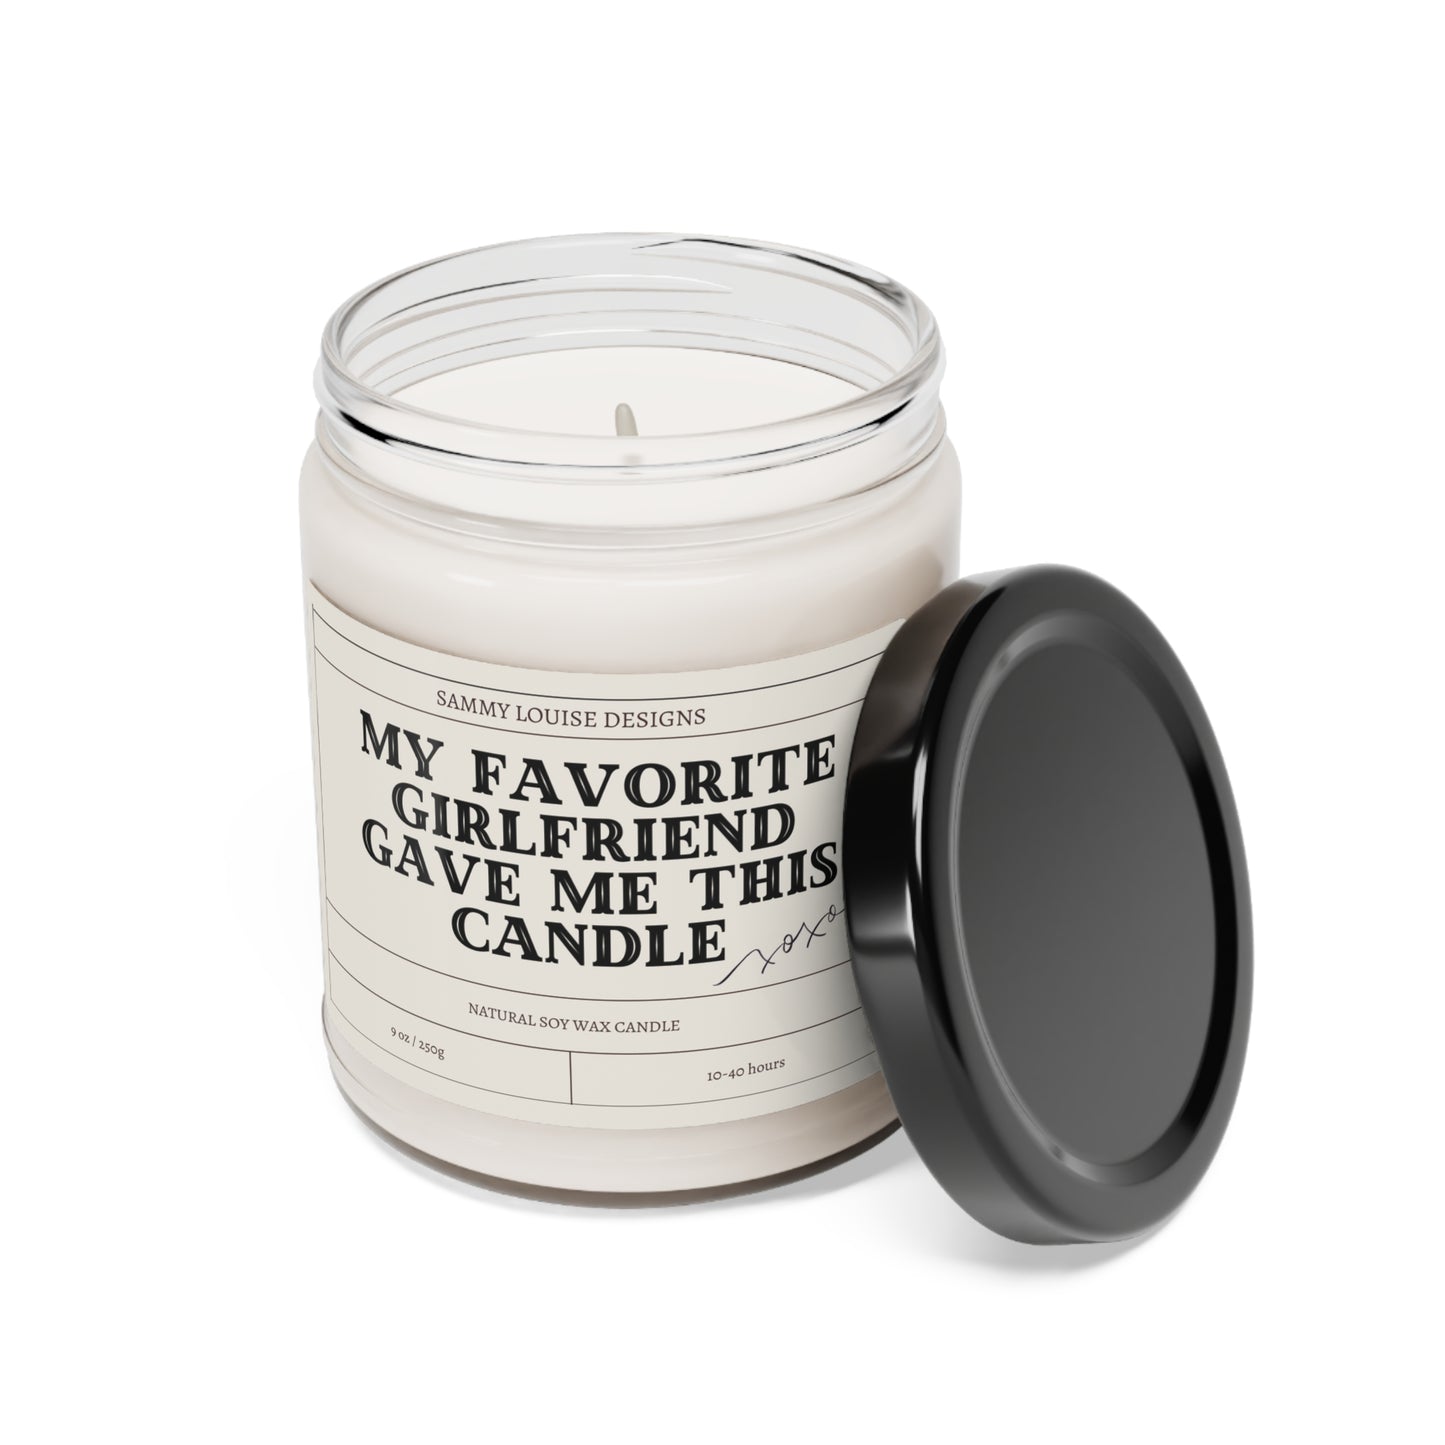 My Favorite Girlfriend Scented Soy Candle, 9oz